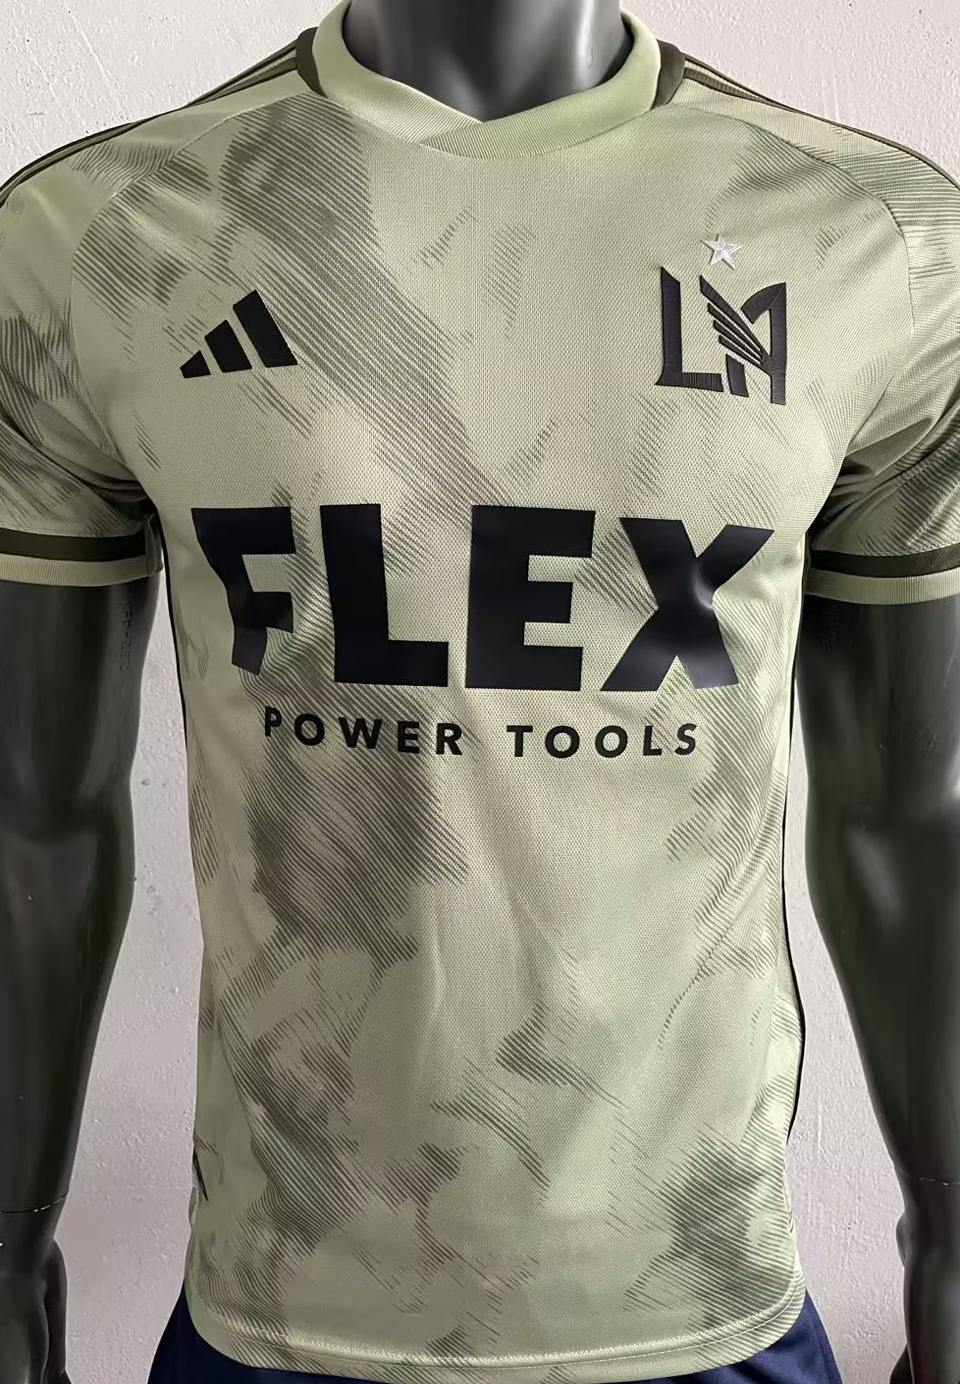 Player Version 23-24 Los Angeles FC Away Jersey - Kitsociety